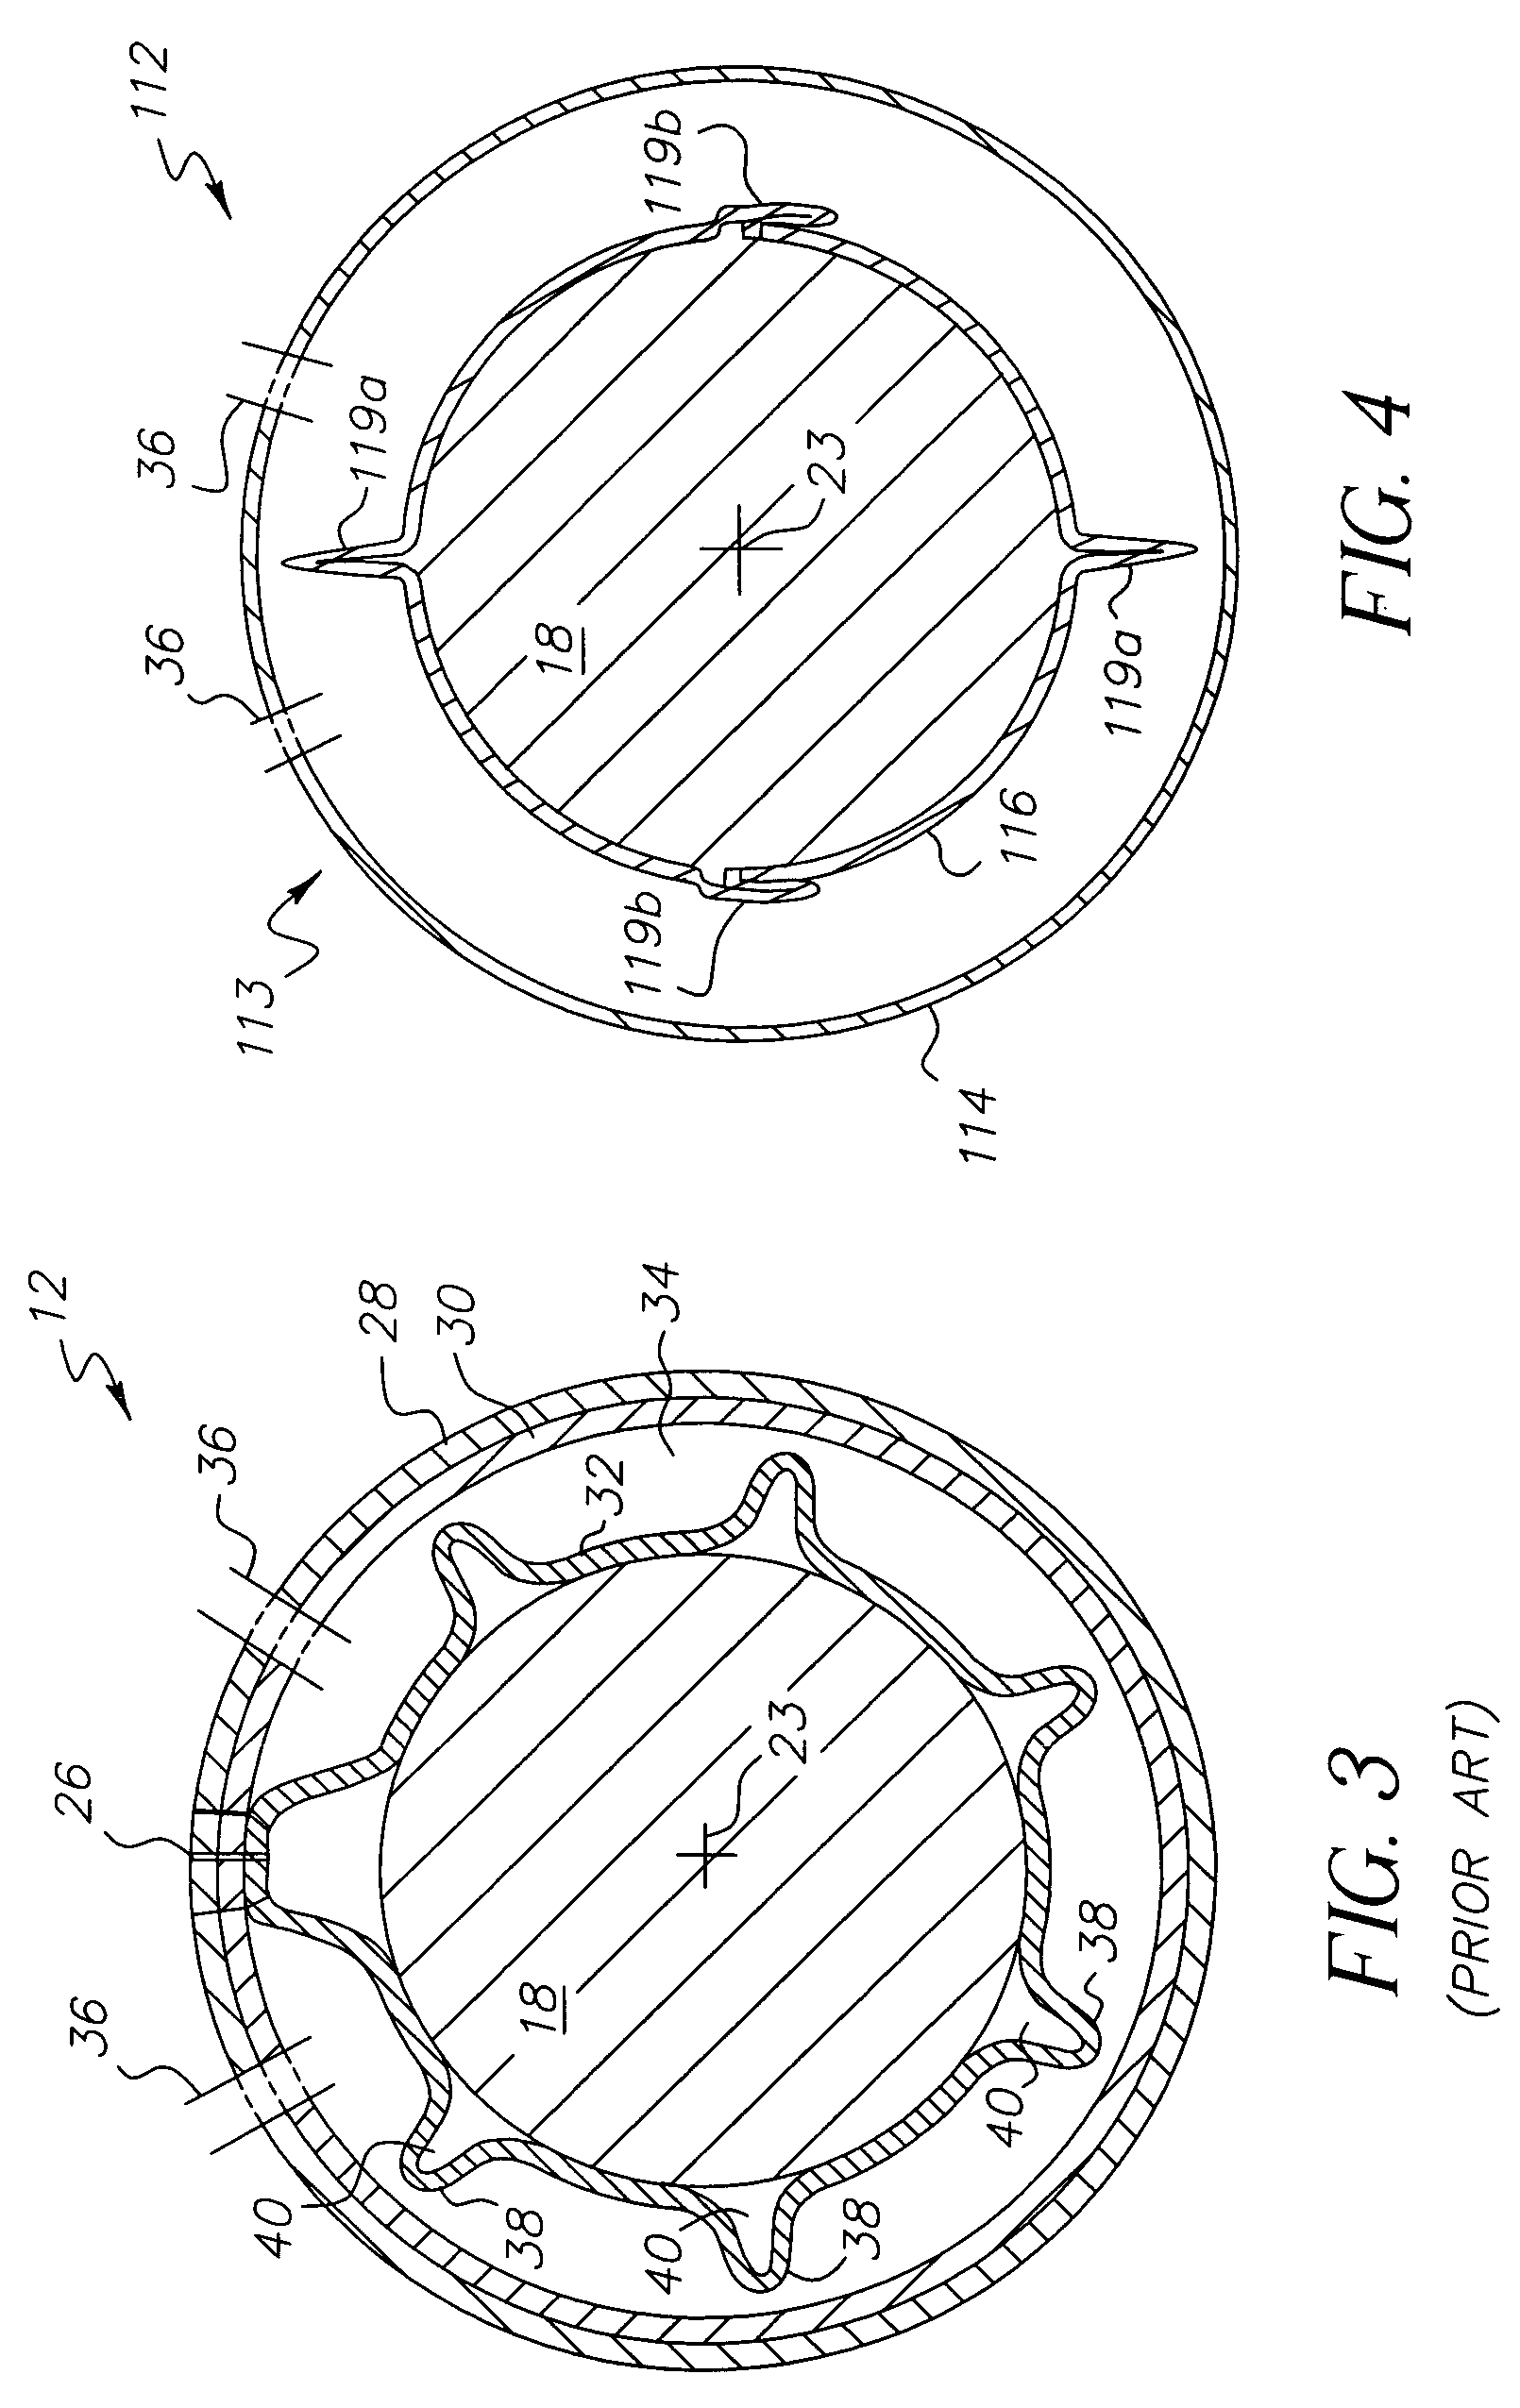 Ring-shaped cuff for measurement of blood pressure